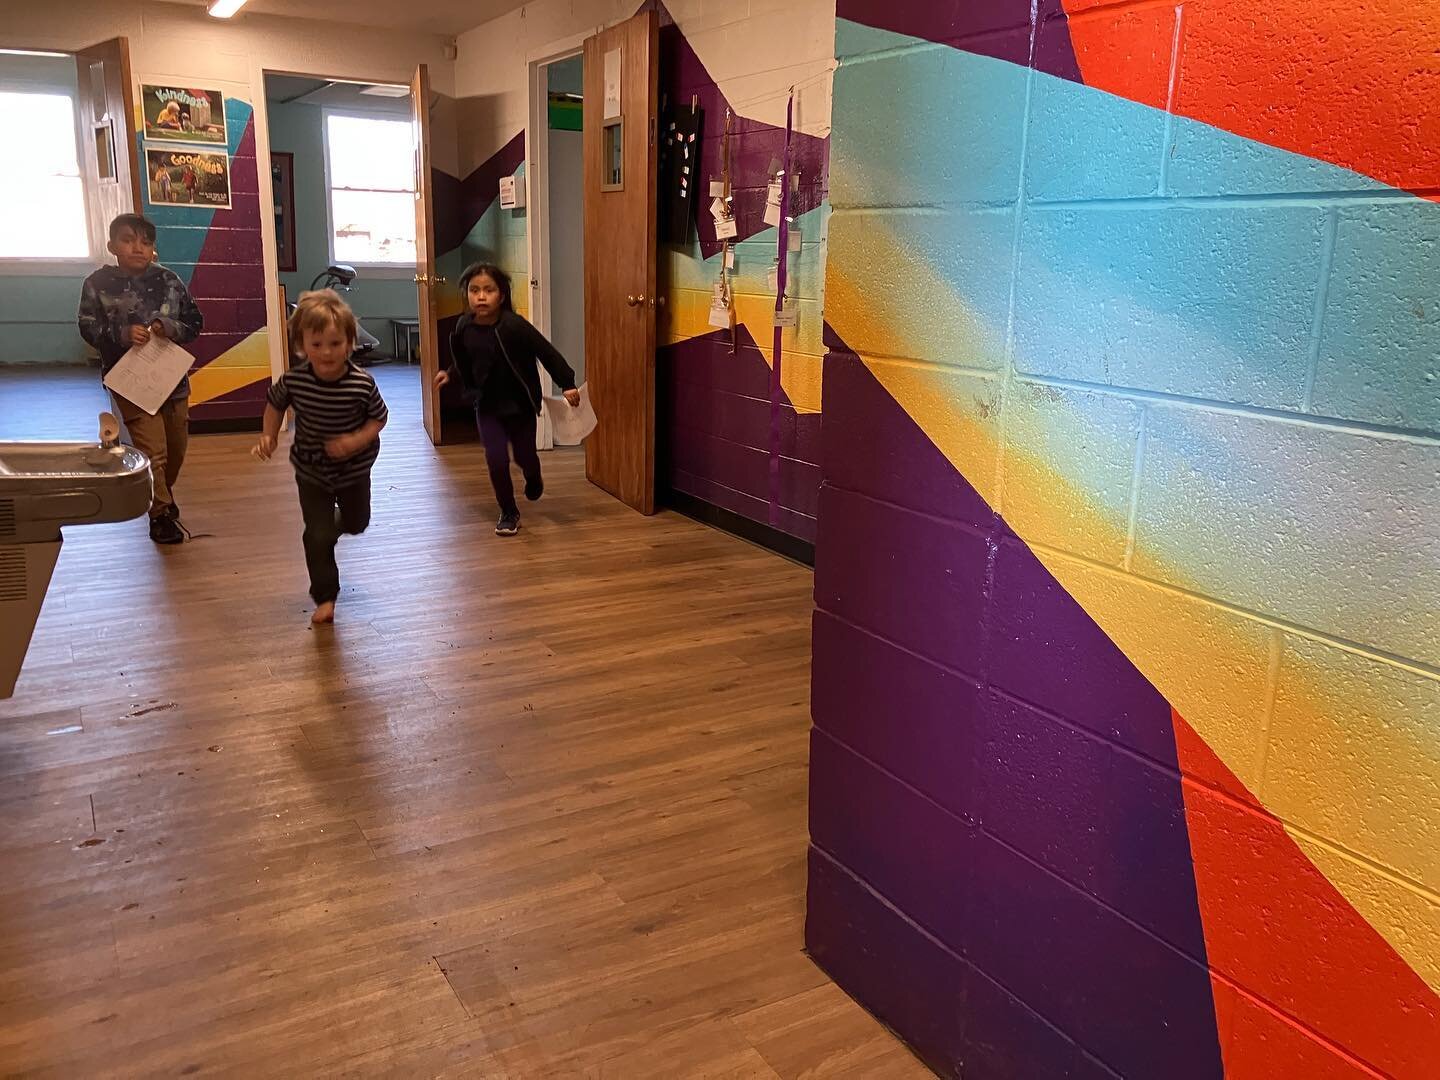 I love muraling spaces for kids. It feels like illustrating the walls, setting the scene for whatever stories the kids are creating. 
💛
I got to go visit this space this week, one I painted years ago now. And to see the hallway full of kids (my kids